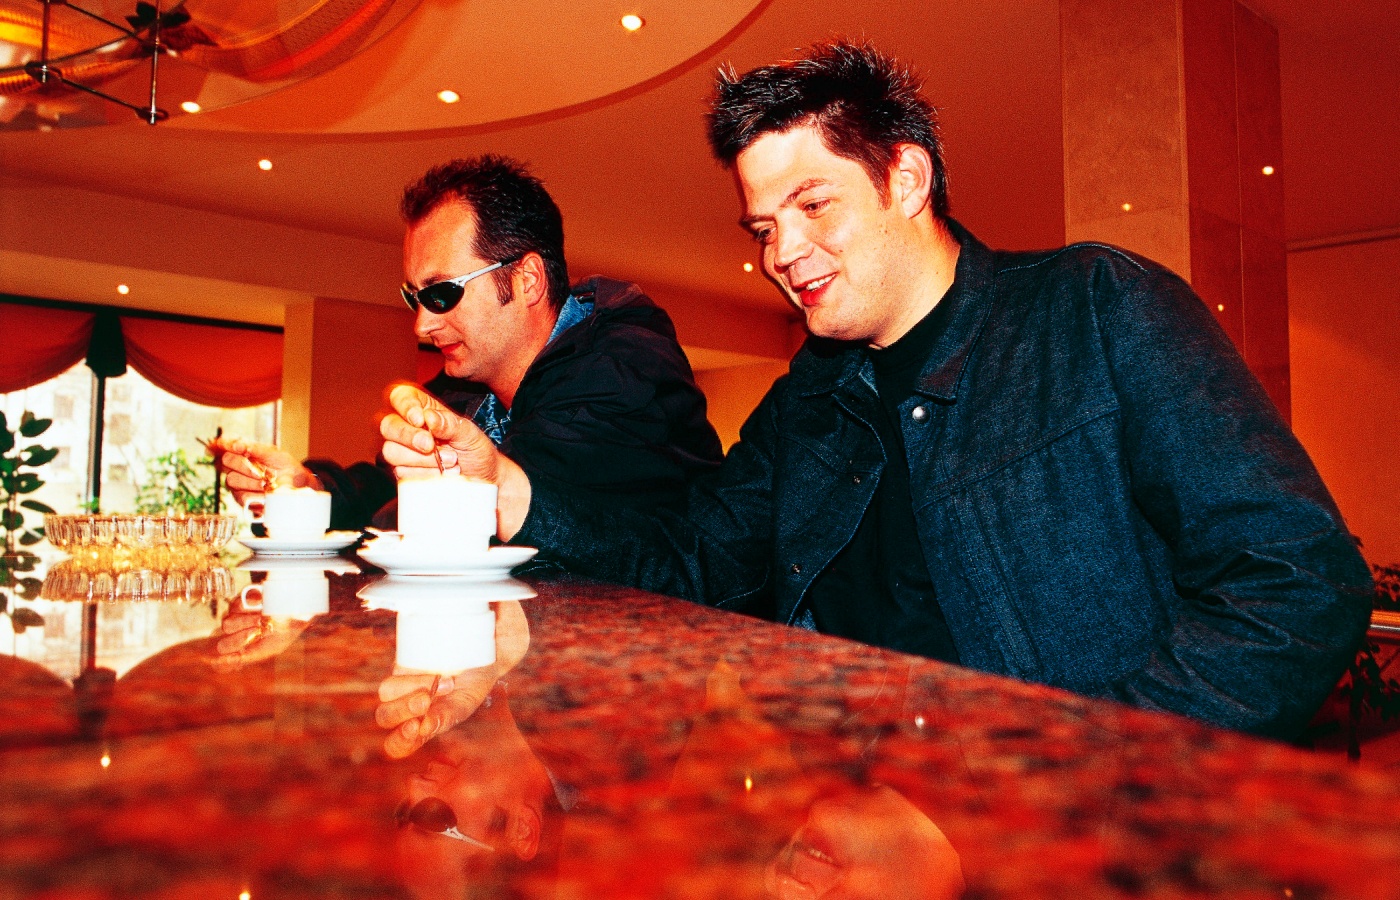 Orde Meikle and Stuart McMillan of Scottish Techno duo Slam, pose at their hotel on April 21, 2001 in Prague.